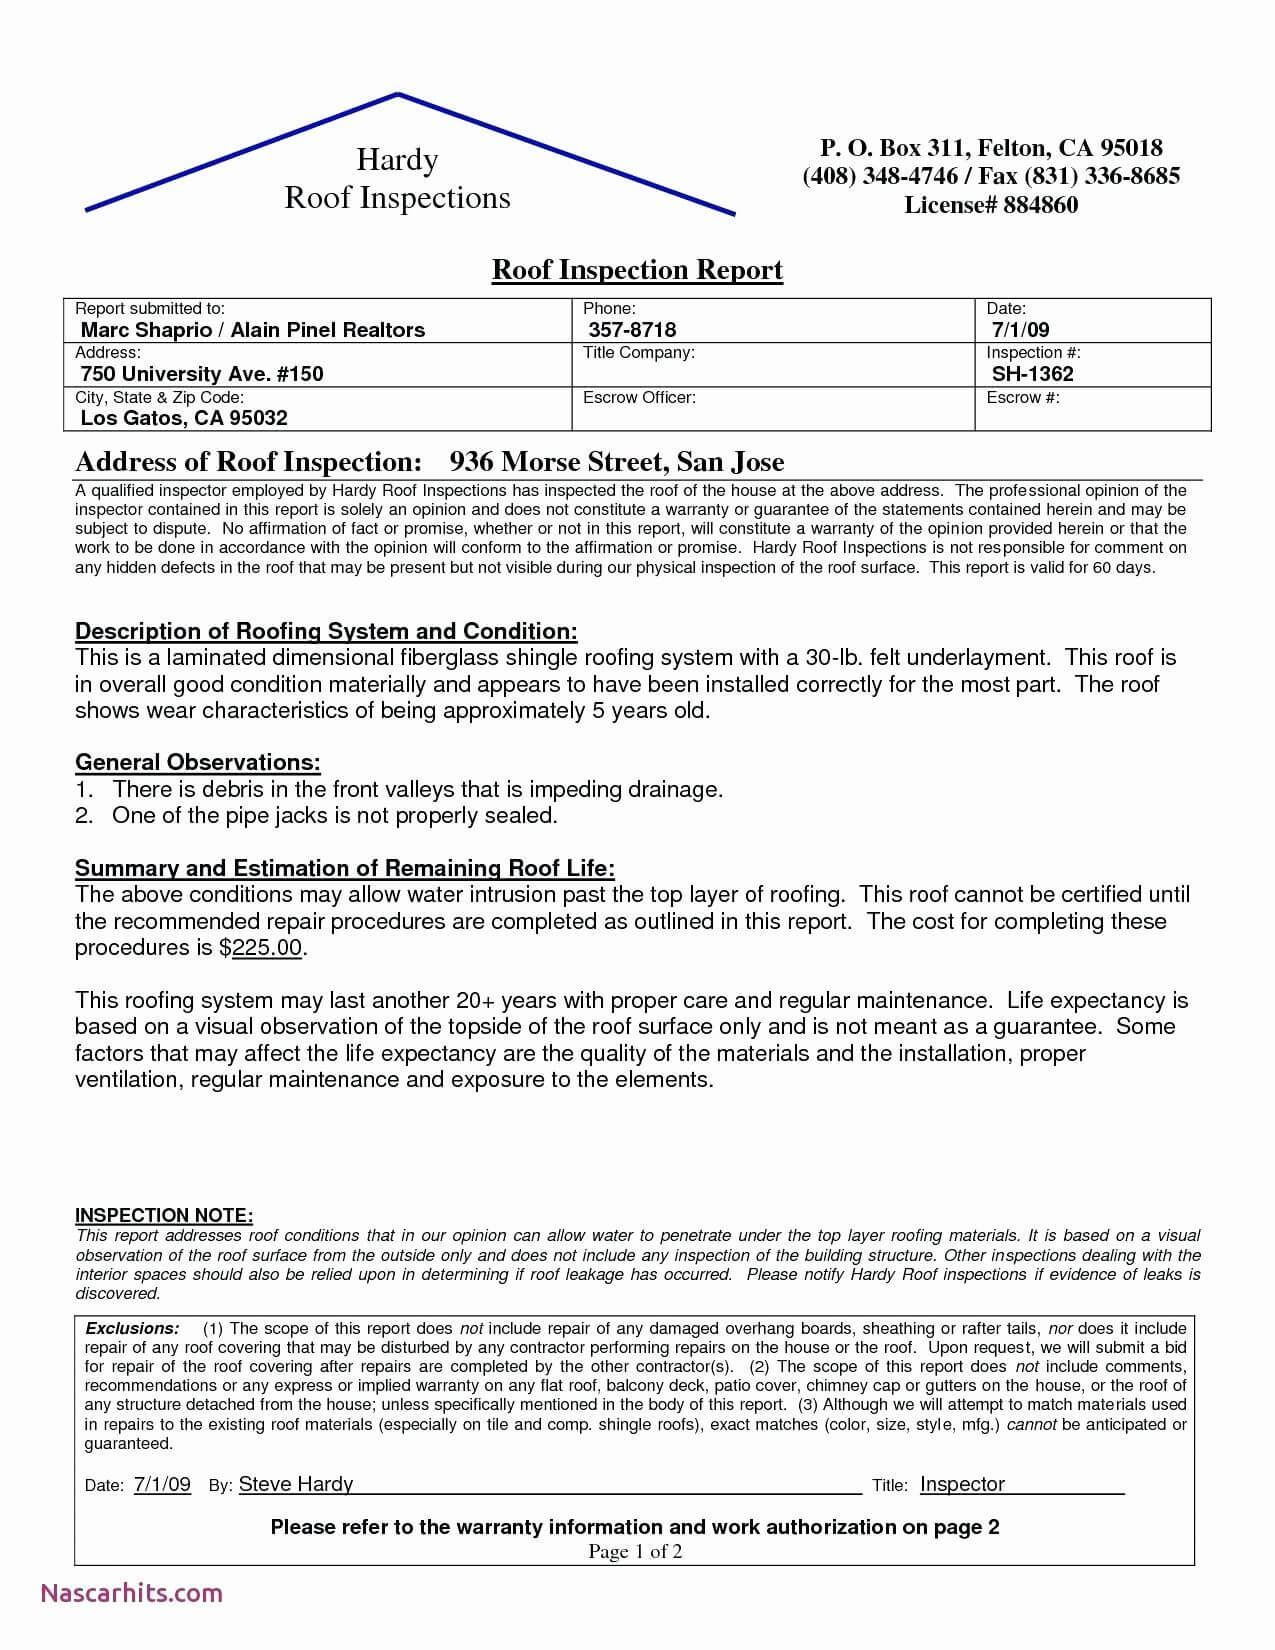 Inspection Report Template Word Best Of Template Inspection Regarding Roof Inspection Report Template